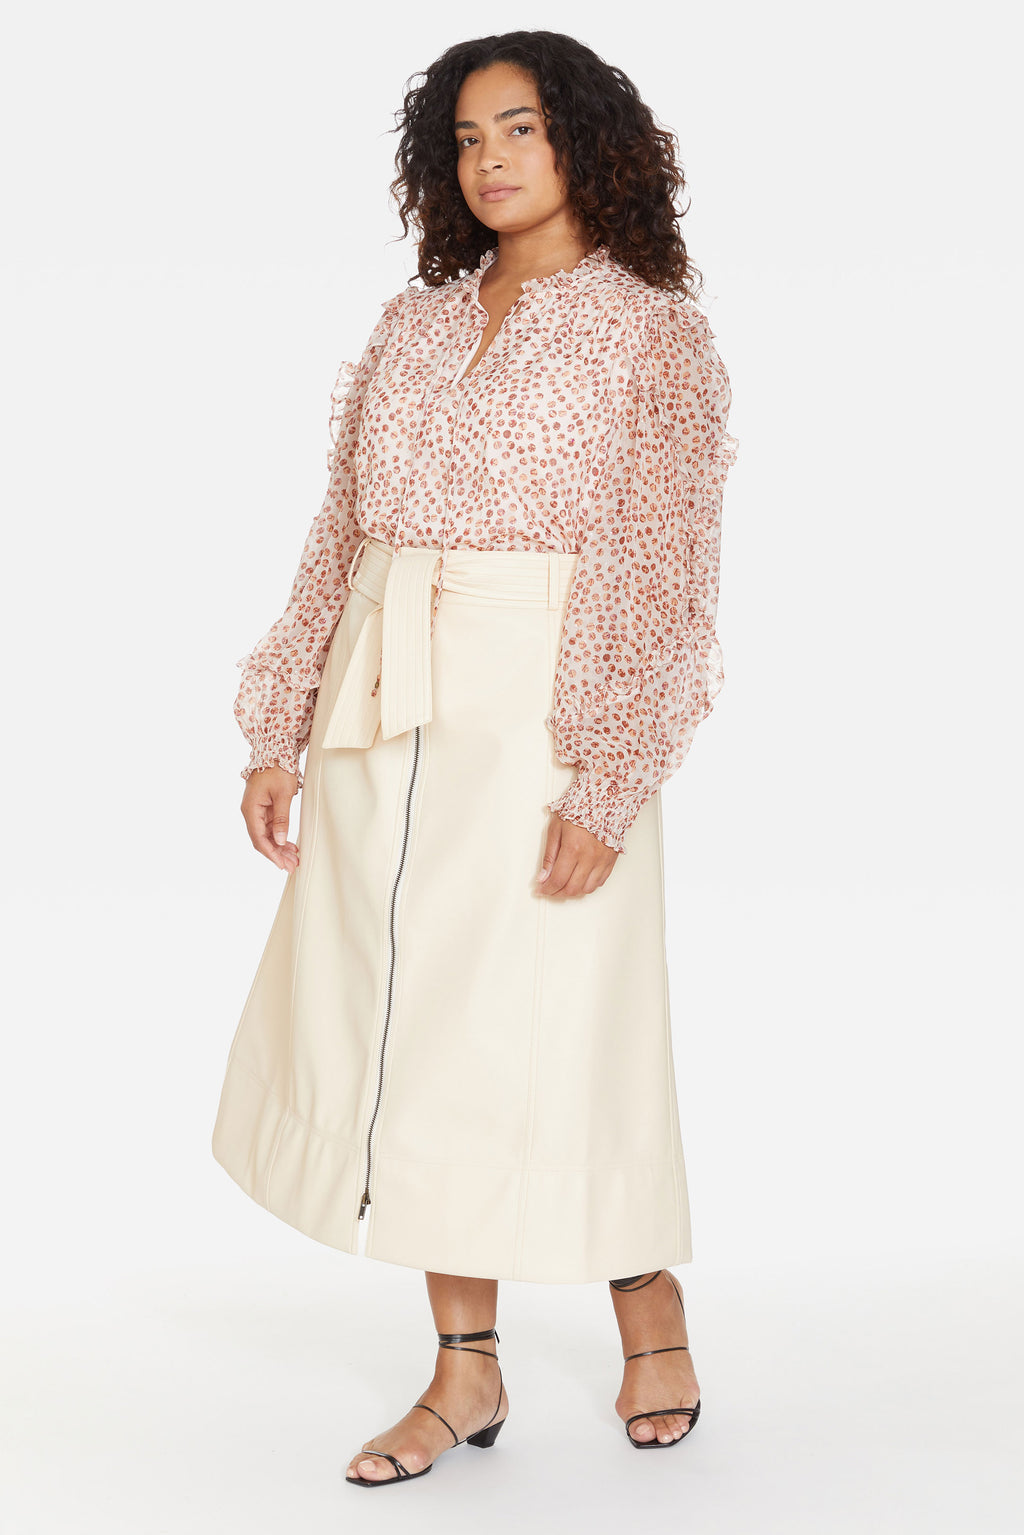 V-neck long sleeve blouse with lined bodice and sheer overlay with a sophisticated metallic pink dot pattern